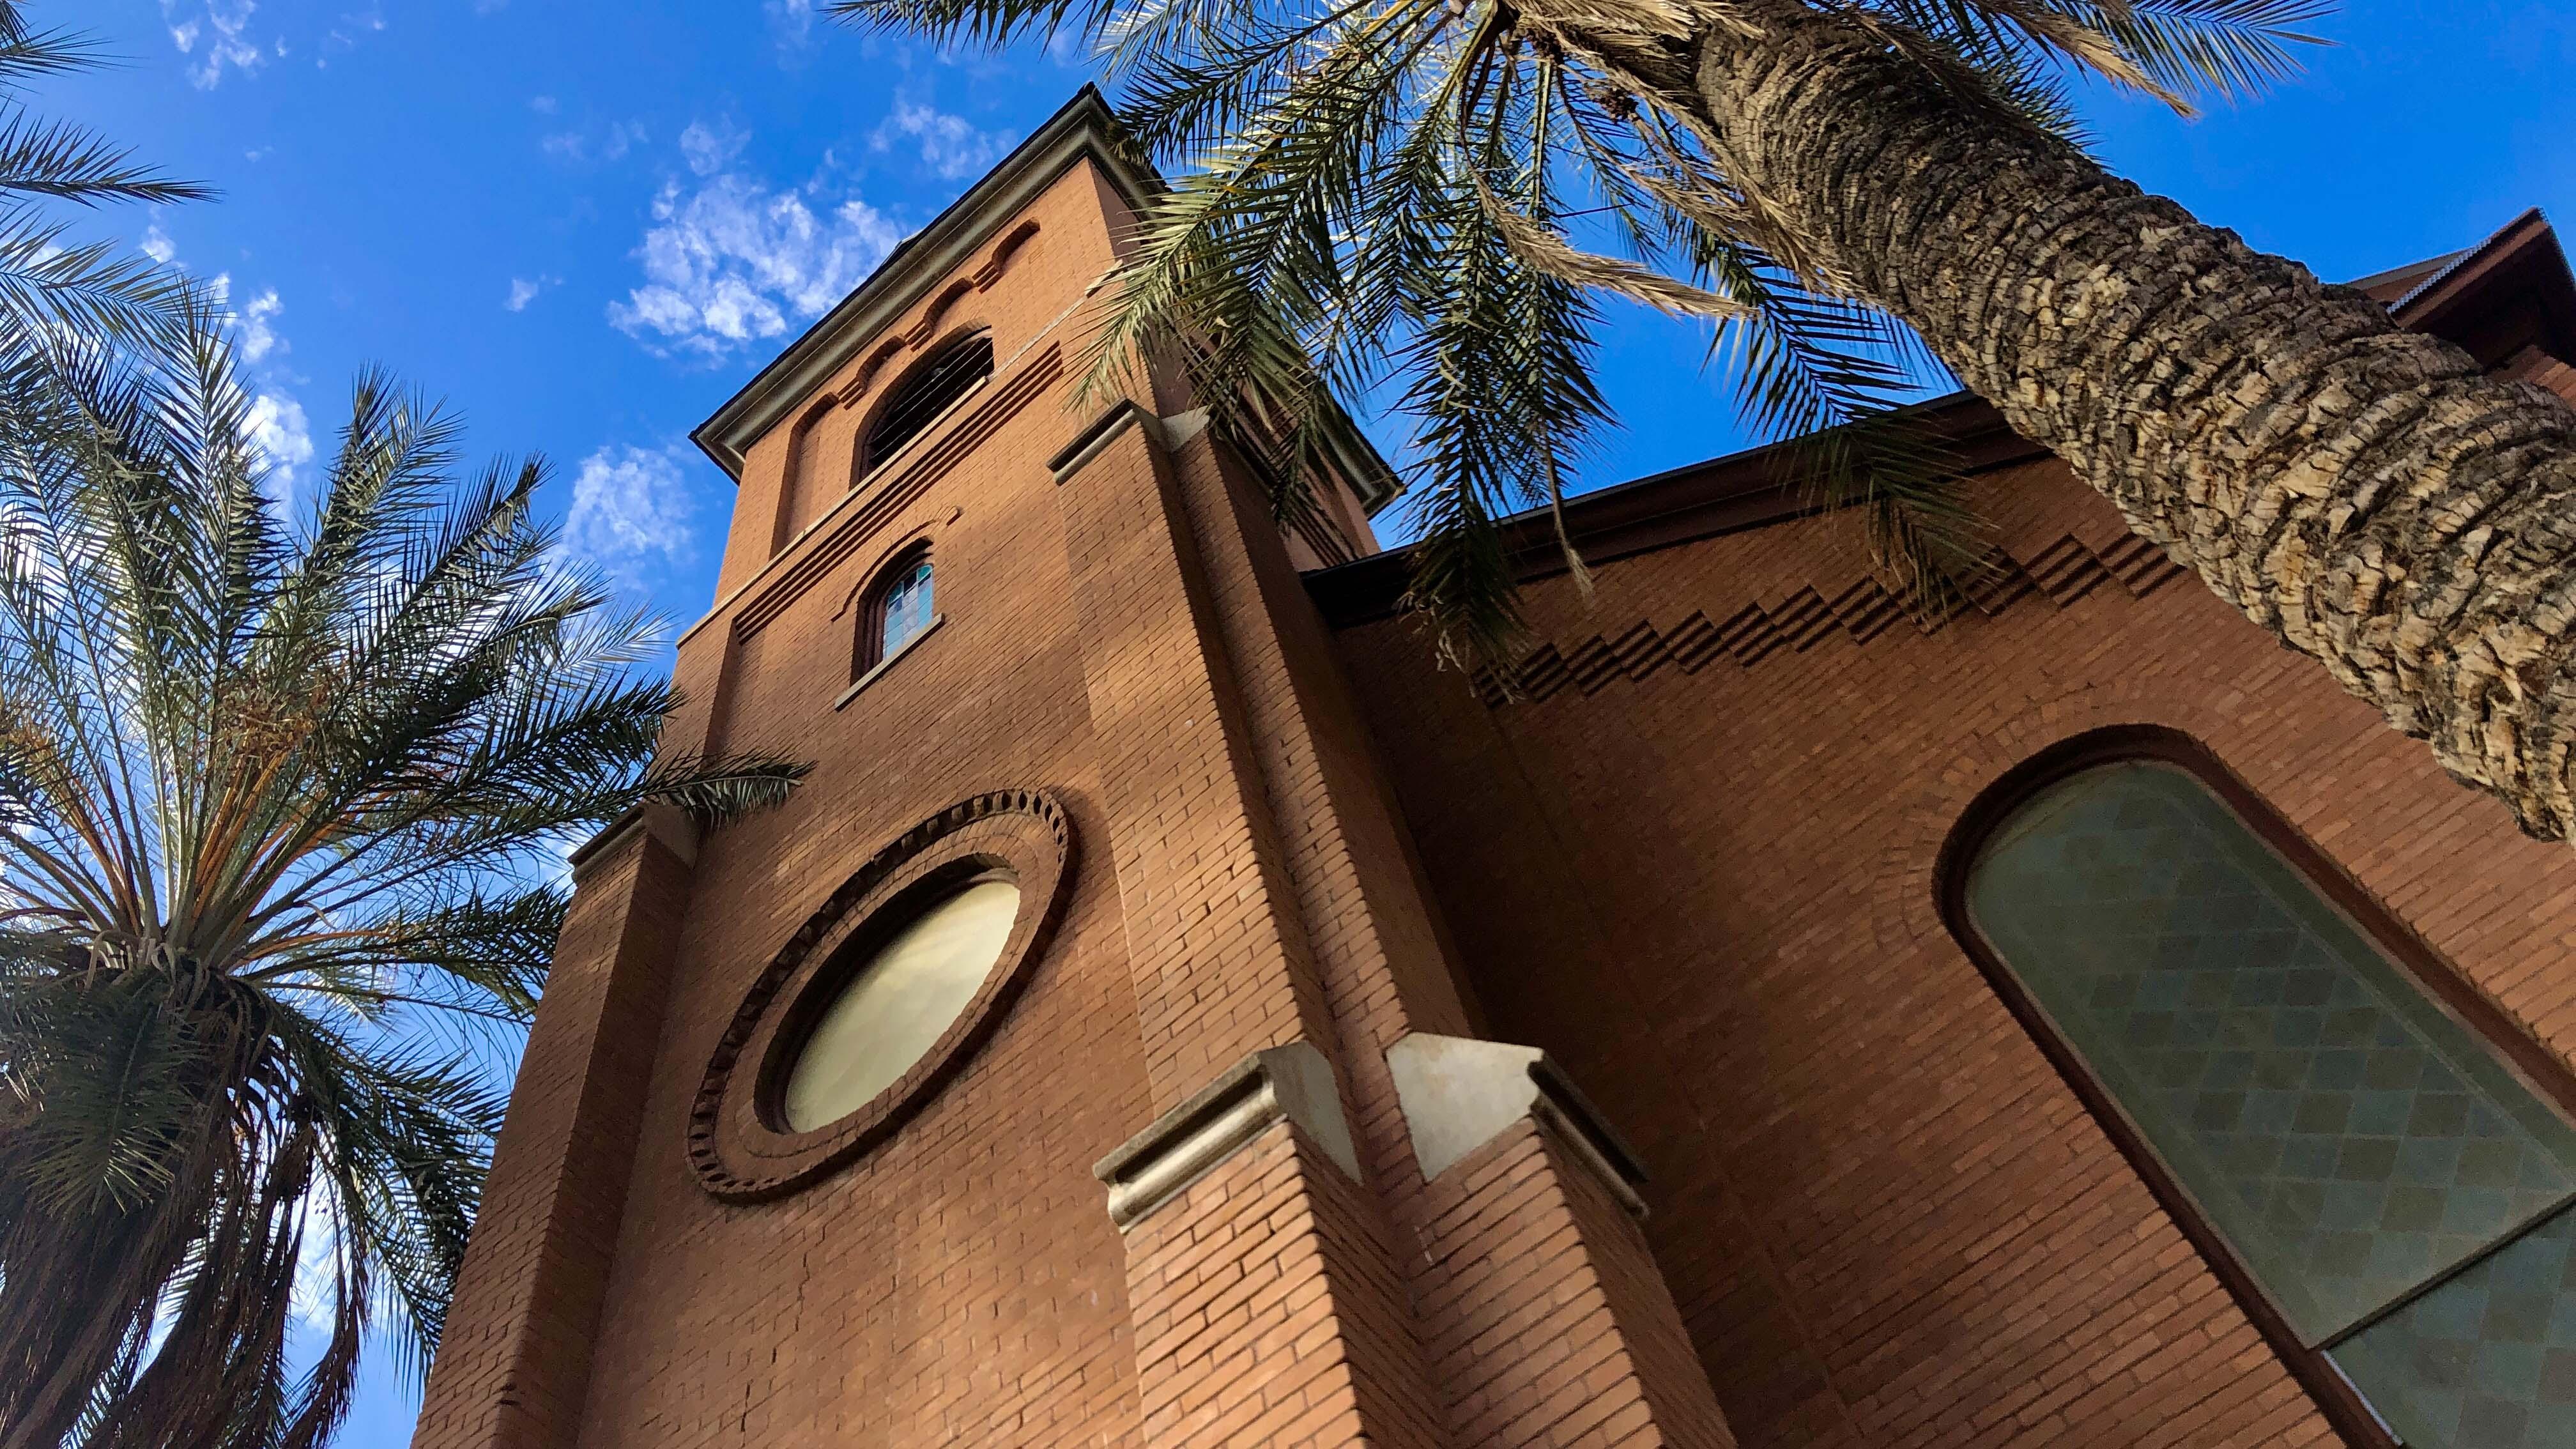 Exterior of Mary College at ASU location in Tempe, AZ